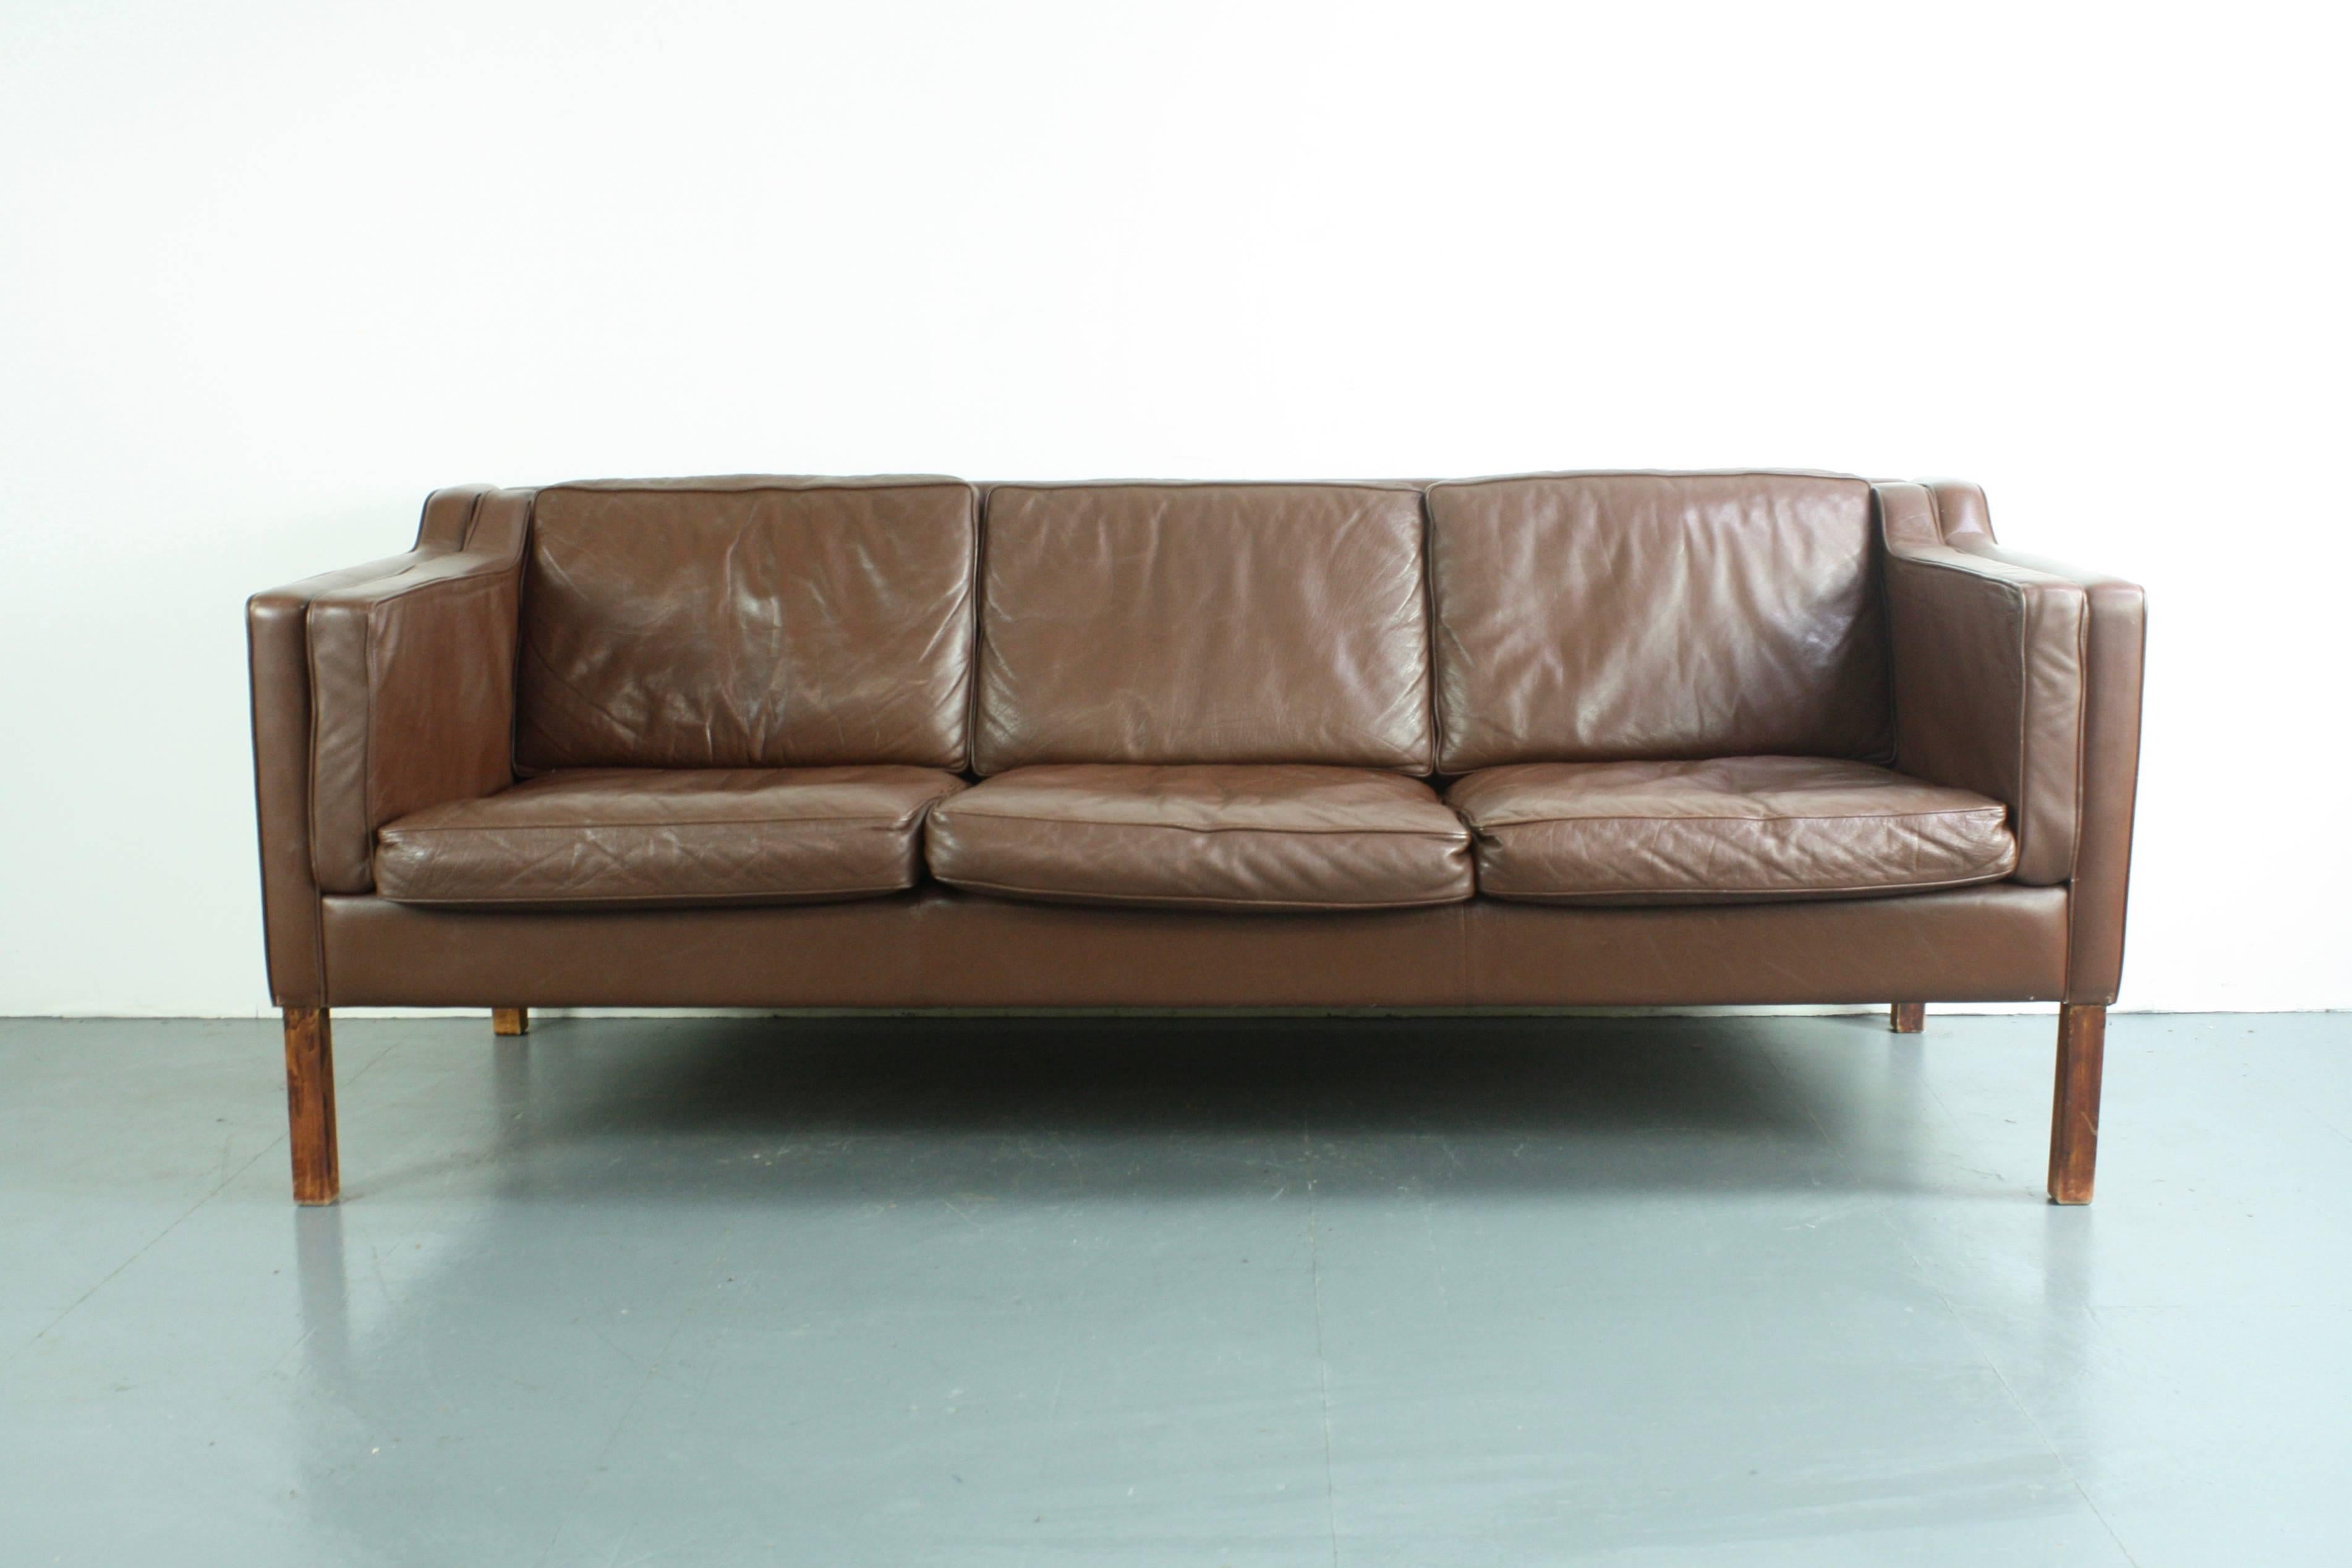 Lovely dark brown leather Mogensen style 1970s three-seat Danish sofa.

Detachable seat cushions. 

Approx dimensions:

Length 196cm

Depth 85cm

Height 73cm

Seat height 43cm.

In good vintage condition; some age-related wear, but